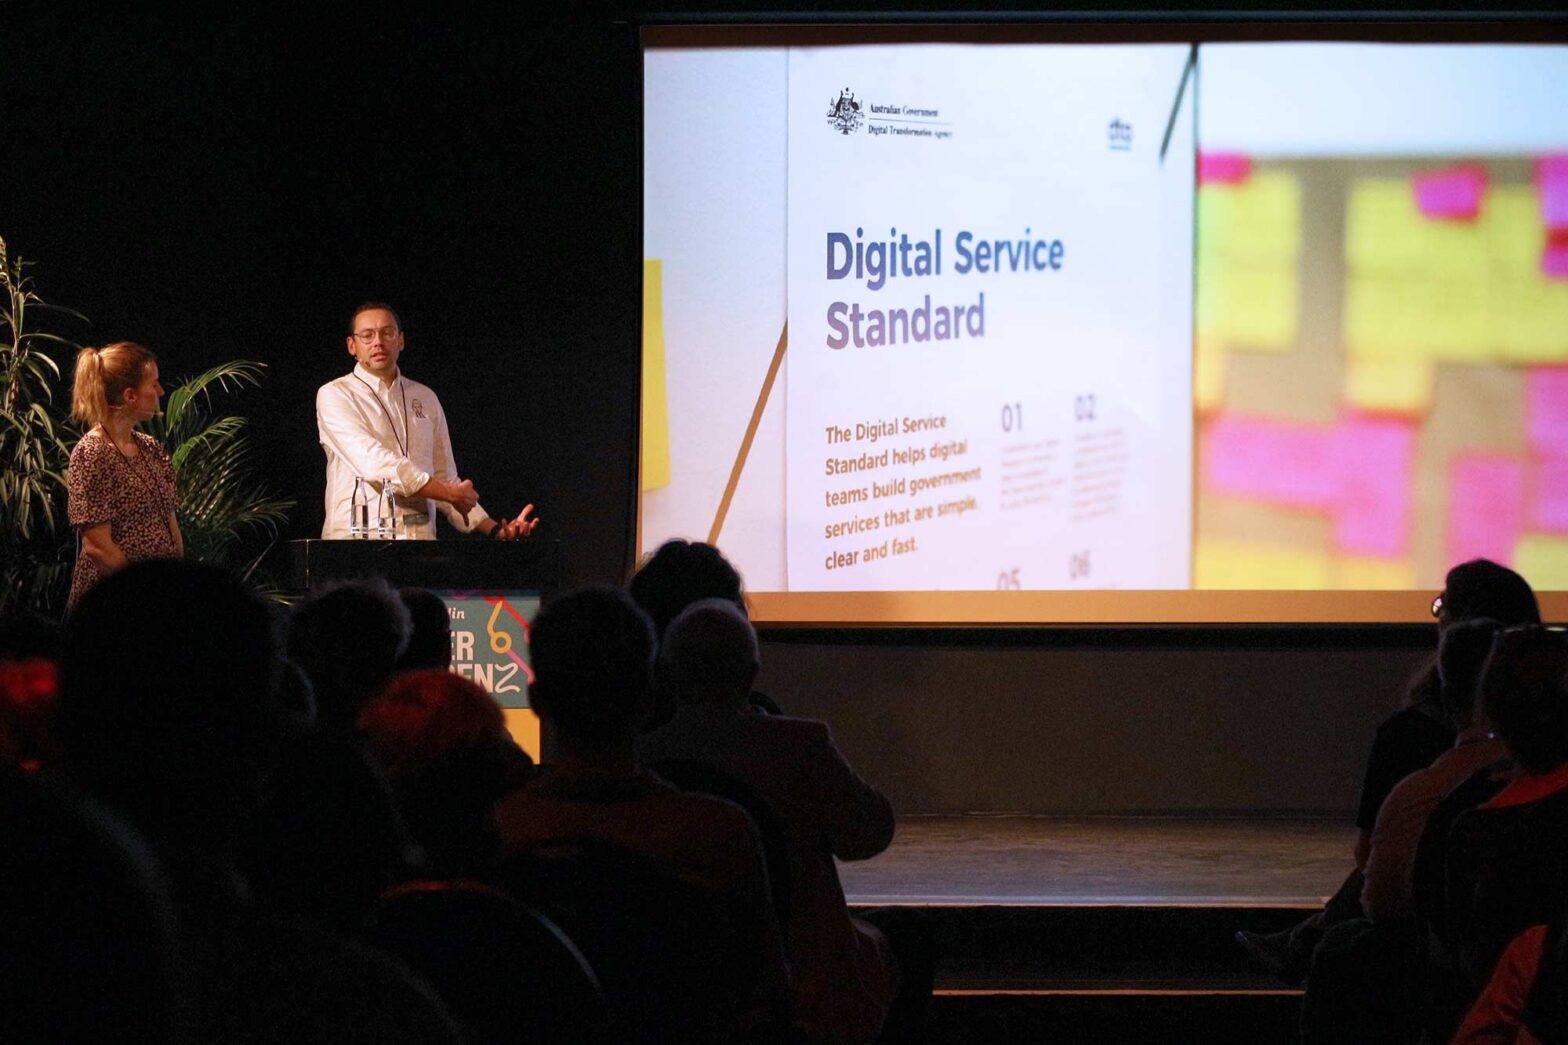 Two presenters stand on a stage in a dimly lit auditorium, facing an audience. The man, wearing glasses and a white shirt, gestures while speaking. The woman, dressed in a patterned dress, stands beside him. Behind them is a large screen displaying a slide titled "Digital Service Standard" with text explaining its purpose to help digital teams build government services.